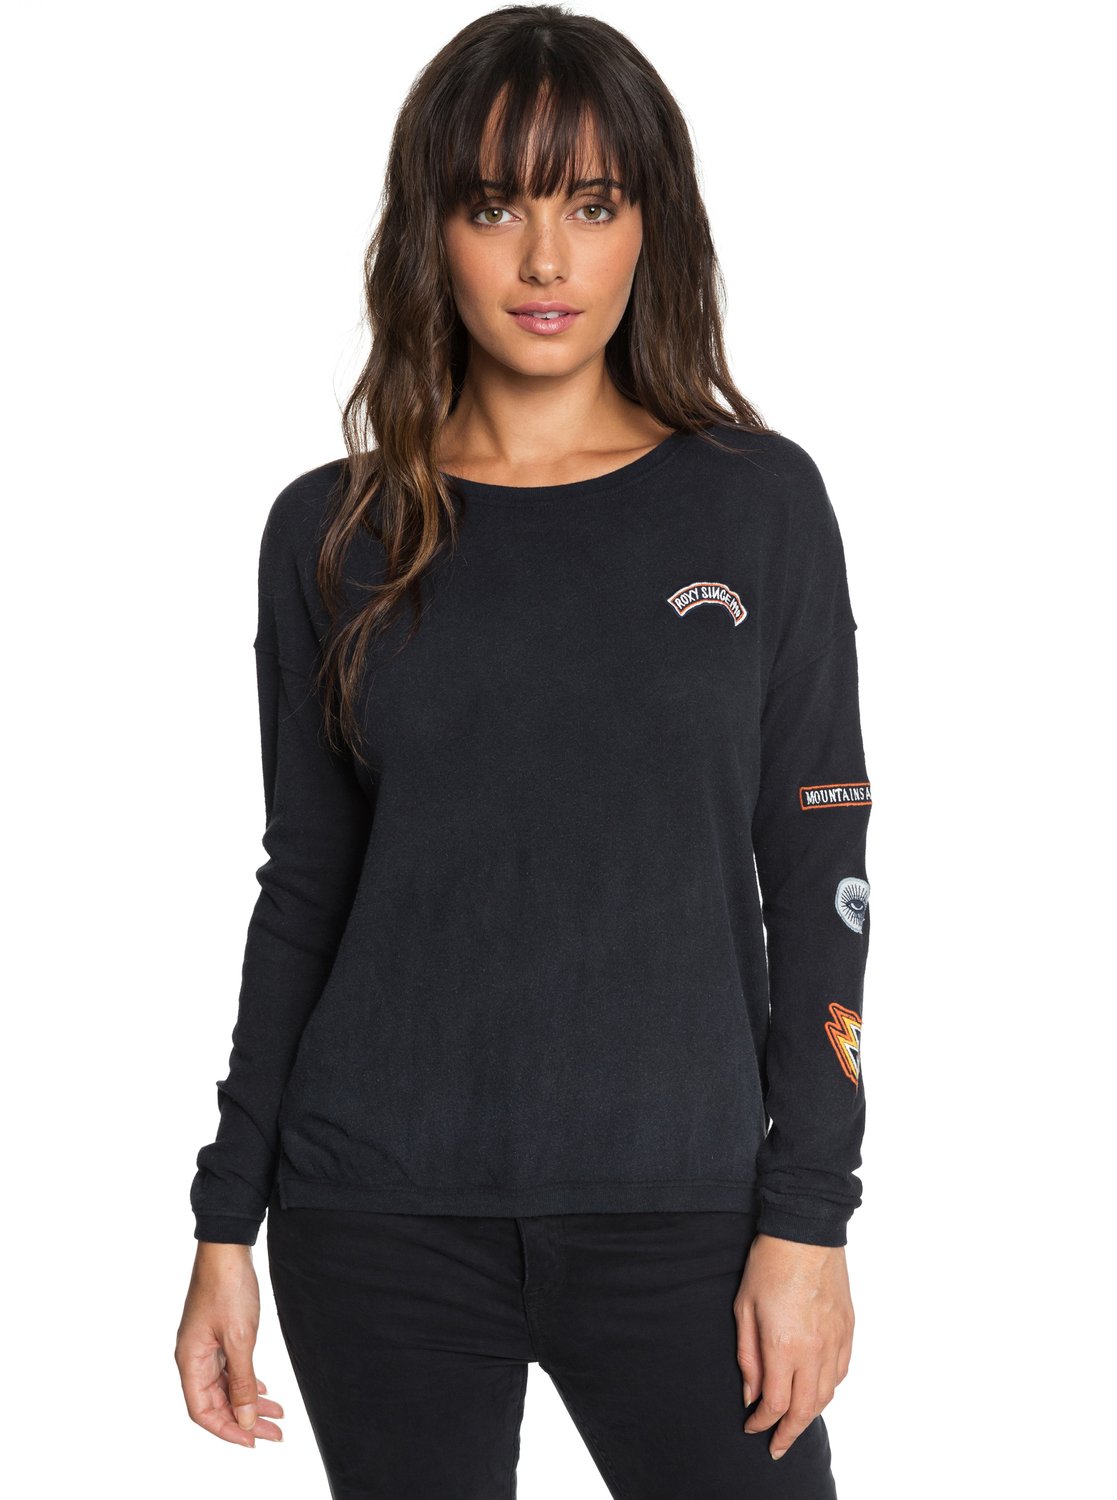 Constellation Party B Long Sleeve Tee